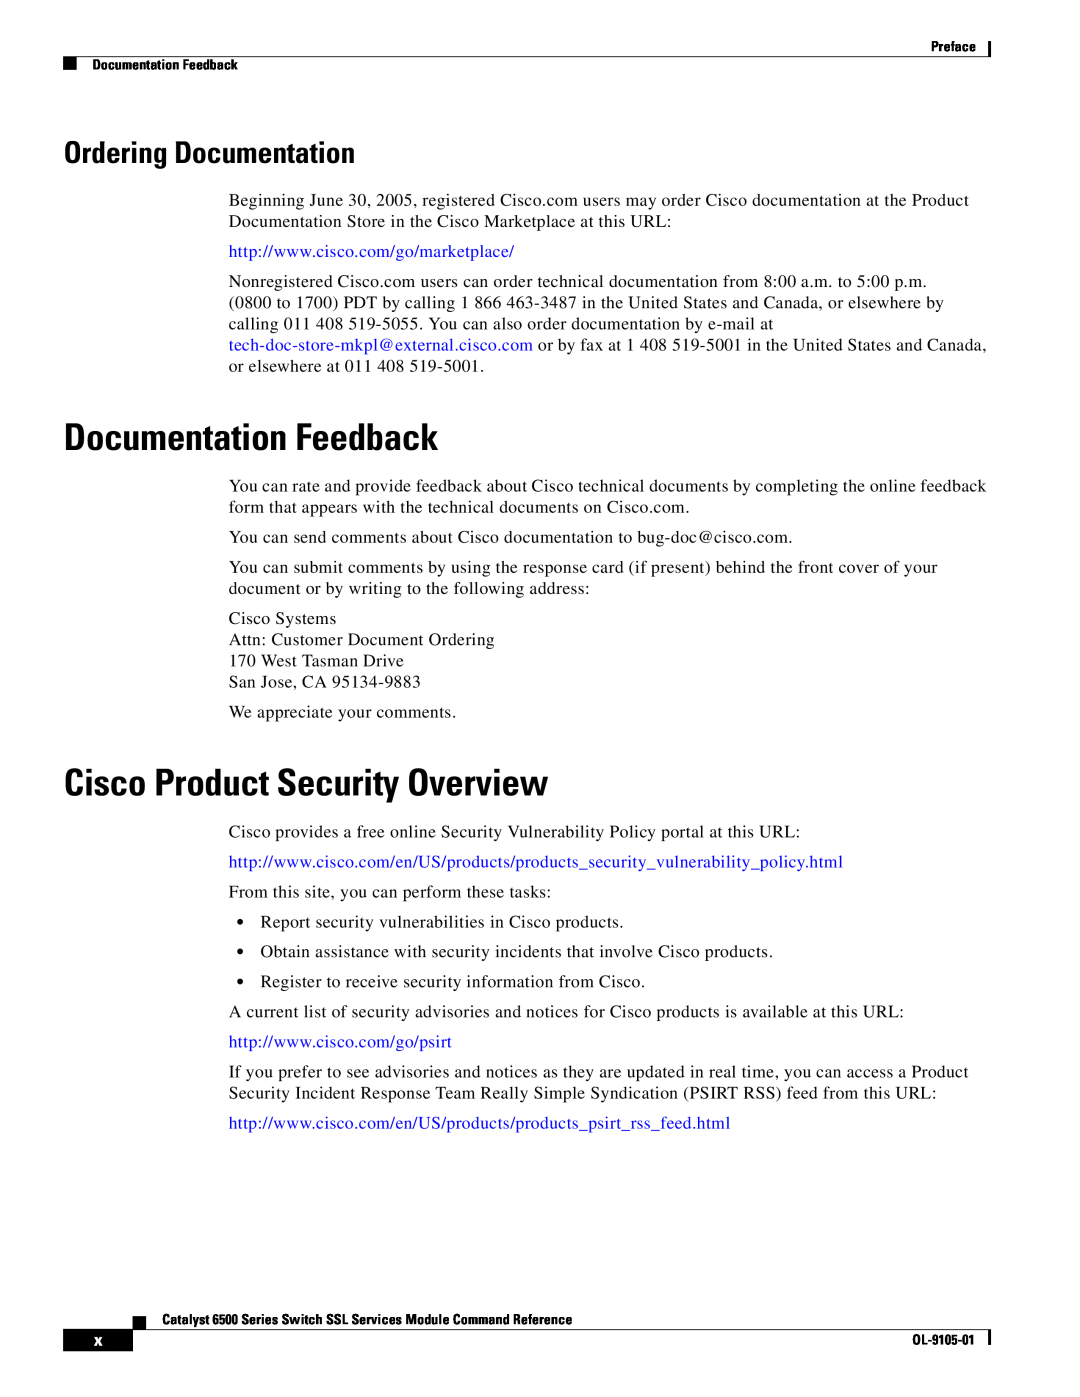 Cisco Systems 6500 manual Documentation Feedback, Cisco Product Security Overview, Ordering Documentation 